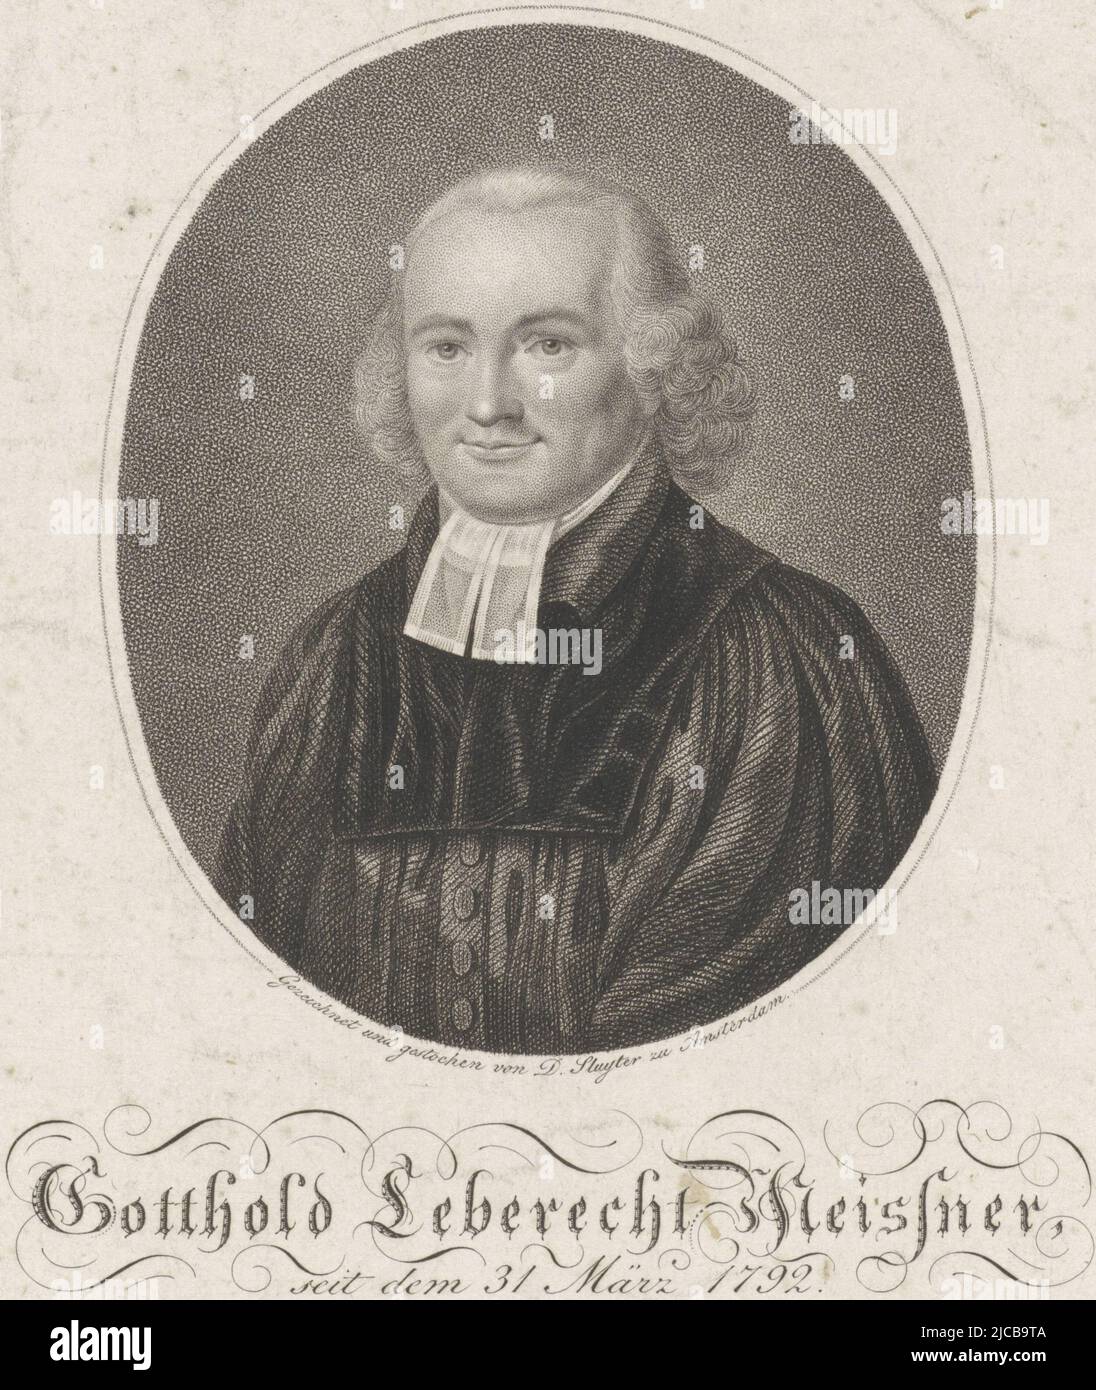 Portrait of German preacher Gotthold Leberecht Meissner presented by his children and foster children on the occasion of his 25th wedding anniversary with JT Wilhelmine Mehscheder on June 24, 1818, Portrait of Gotthold Leberecht Meissner, print maker: Dirk Sluyter, (mentioned on object), intermediary draughtsman: Dirk Sluyter, (mentioned on object), Amsterdam, 1818, paper, etching, engraving, h 272 mm × w 204 mm Stock Photo